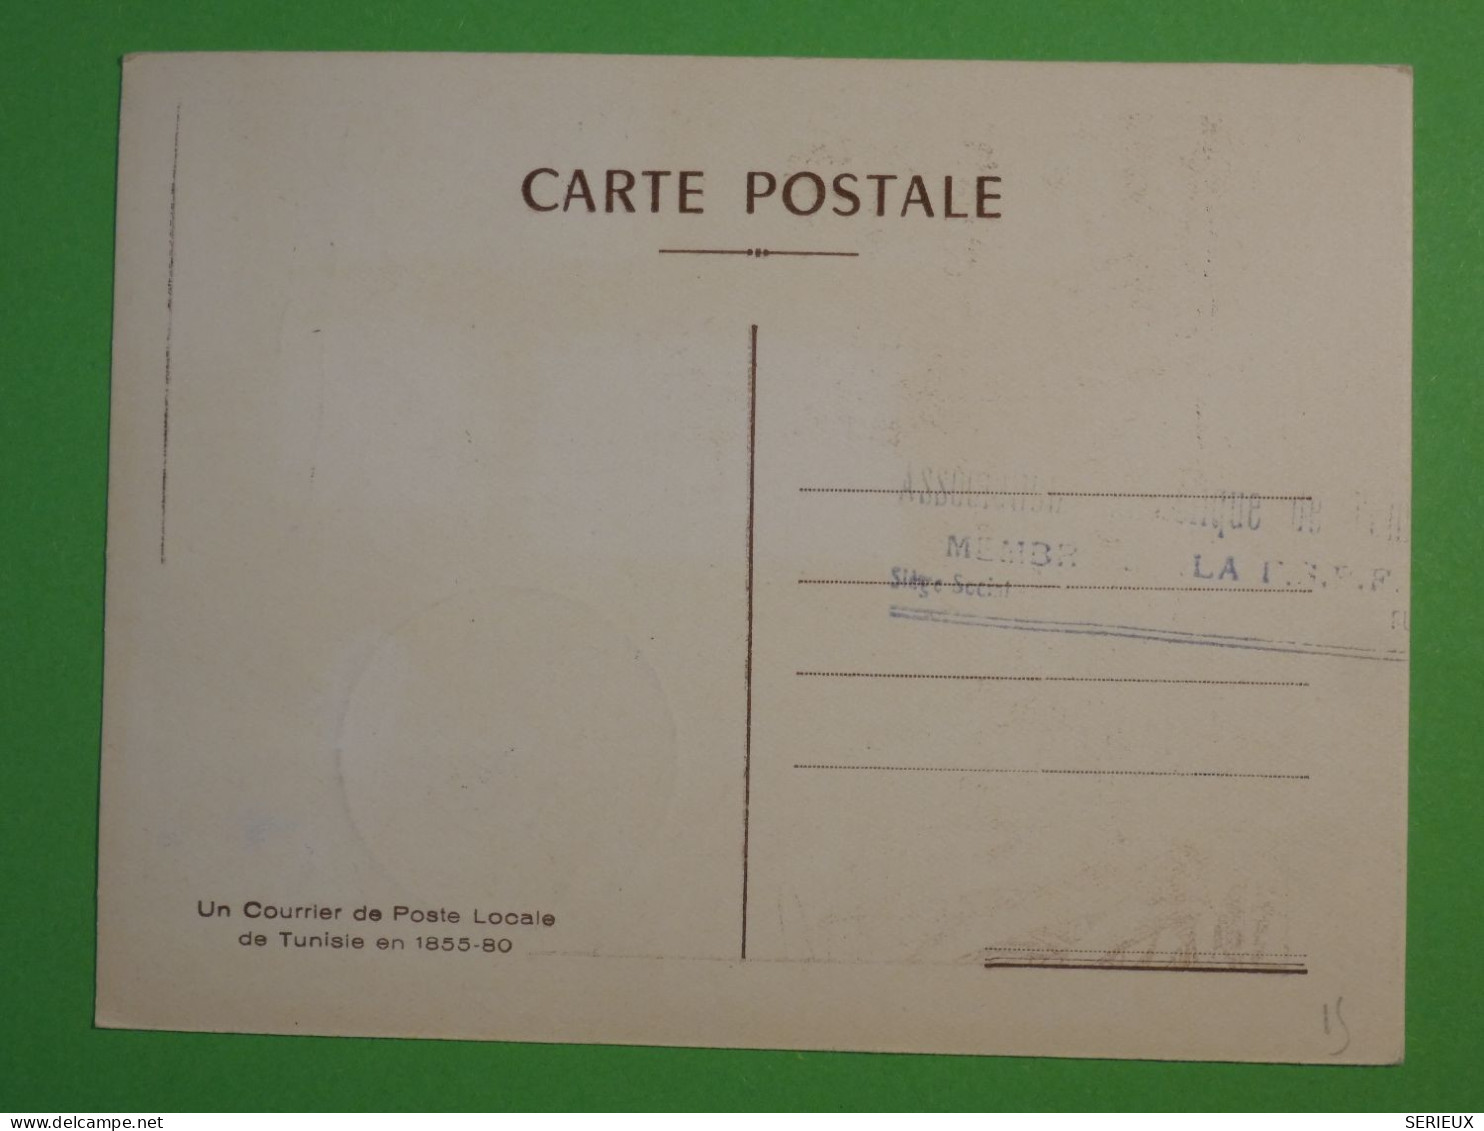 DM 11  TUNISIE     CARTE   JOURNEE TIMBRE 1954  TUNIS   +  +AFF. INTERESSANT +++ - Covers & Documents